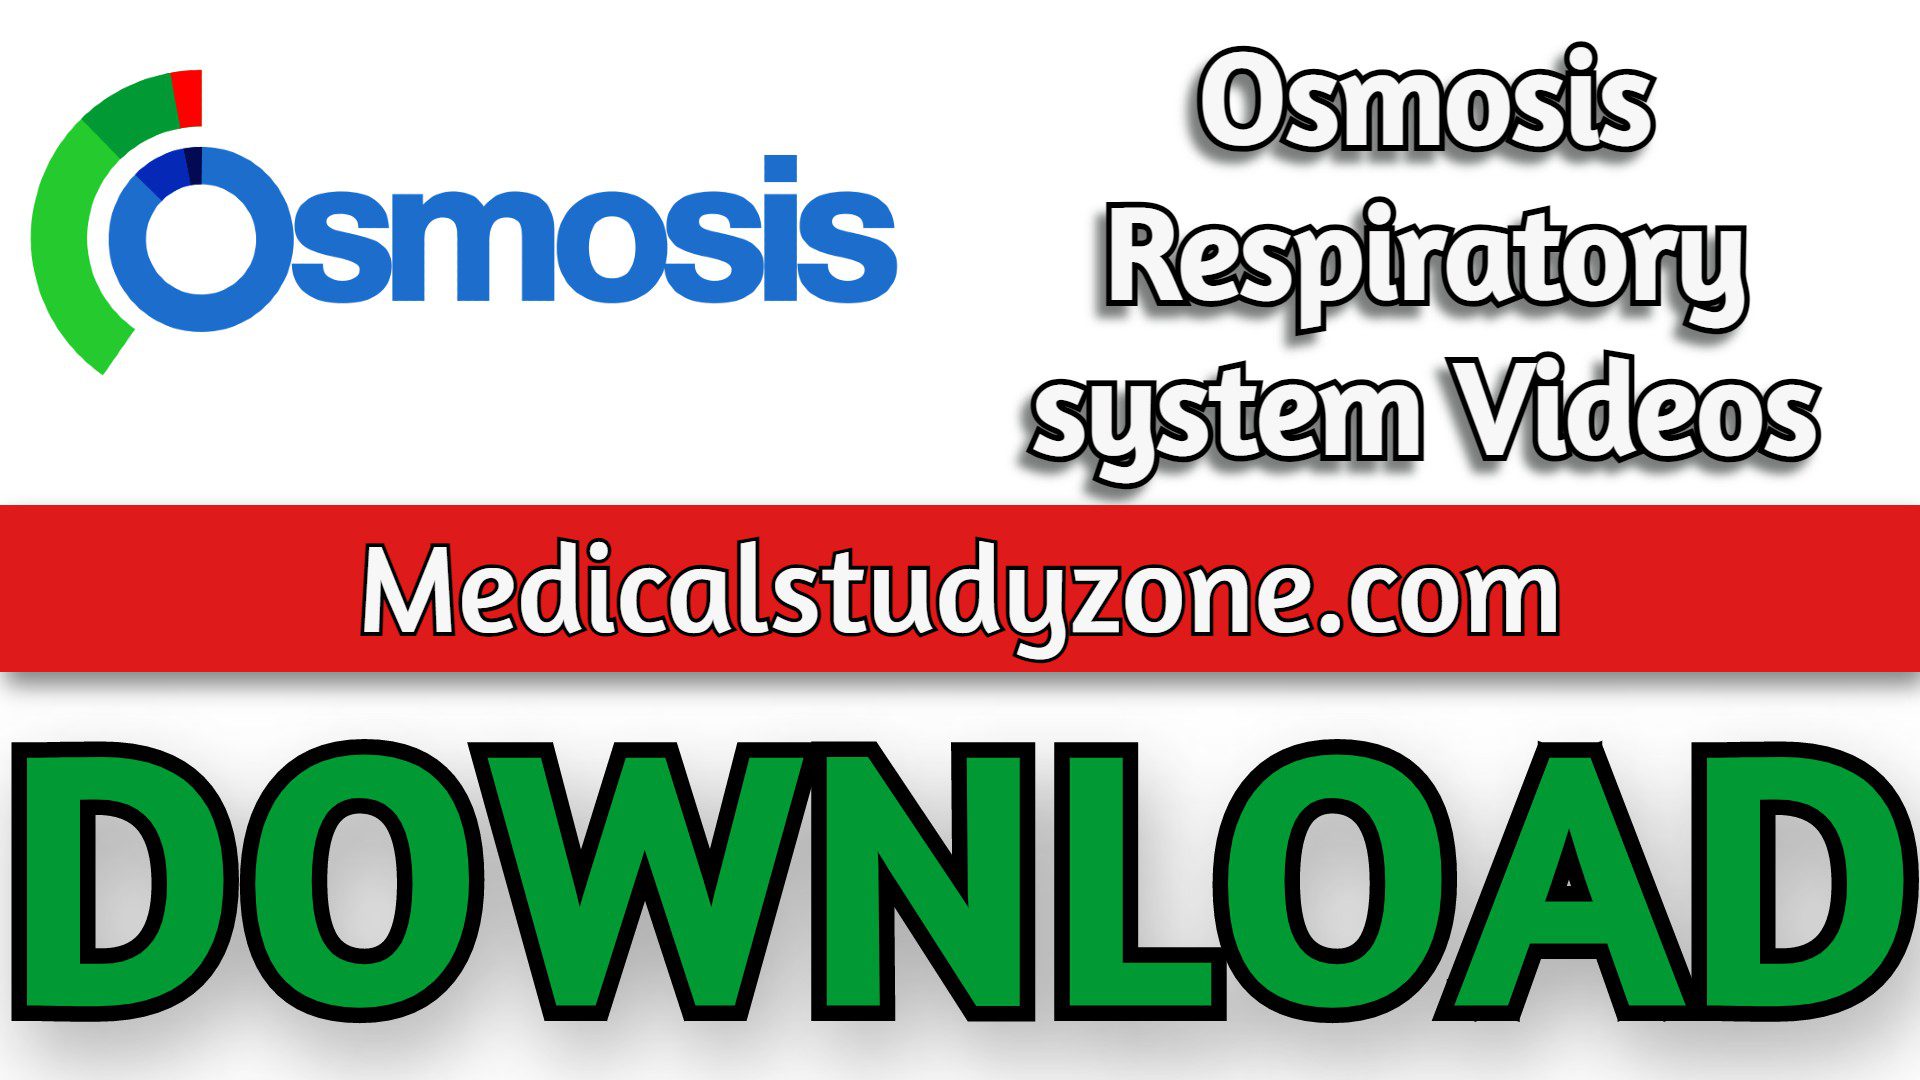 Osmosis Respiratory system Videos 2022 Free Download